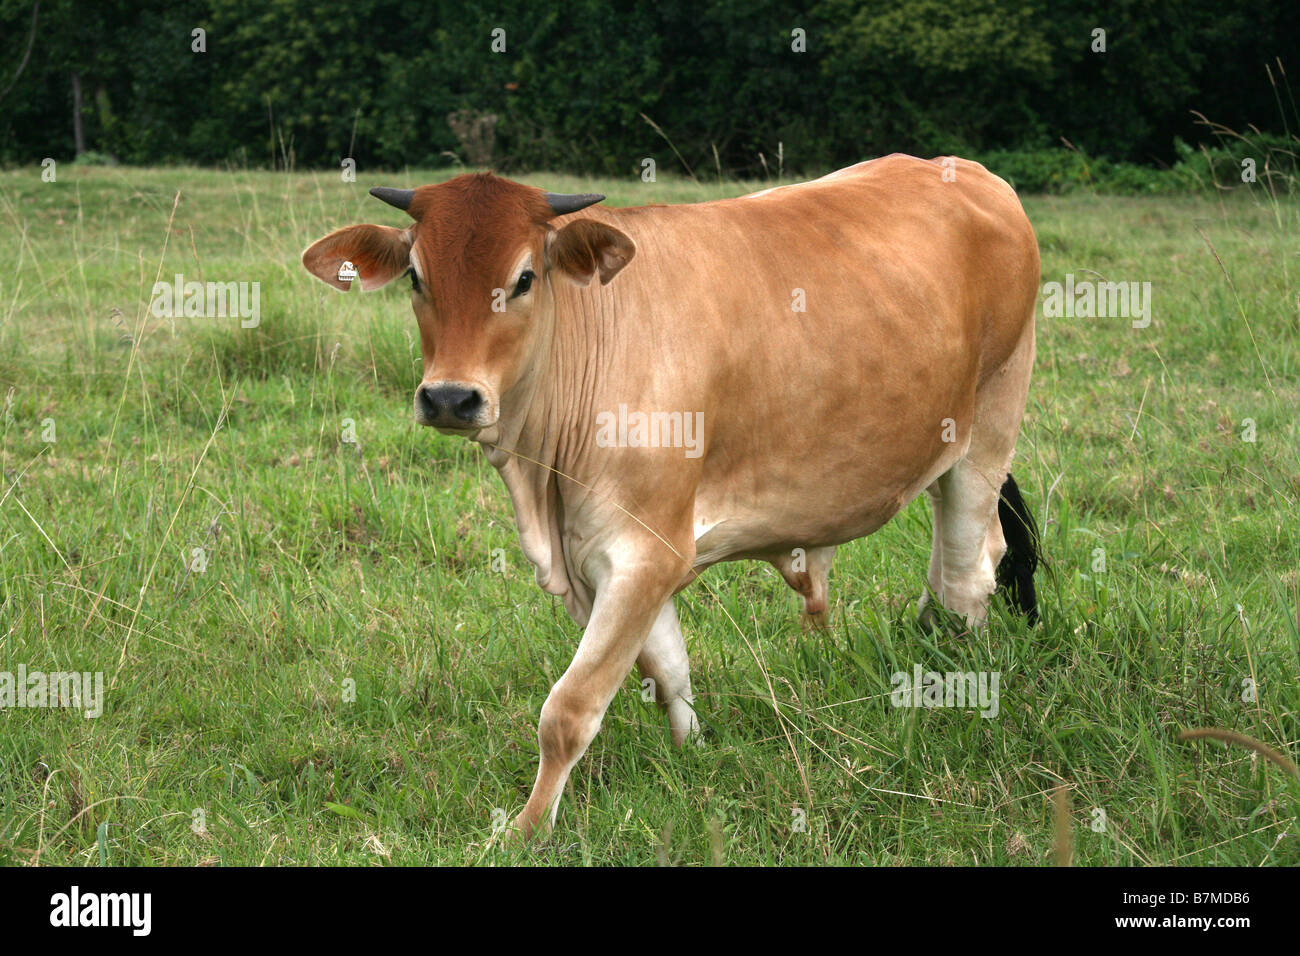 Young Jersey Bull Stock Photo - Alamy